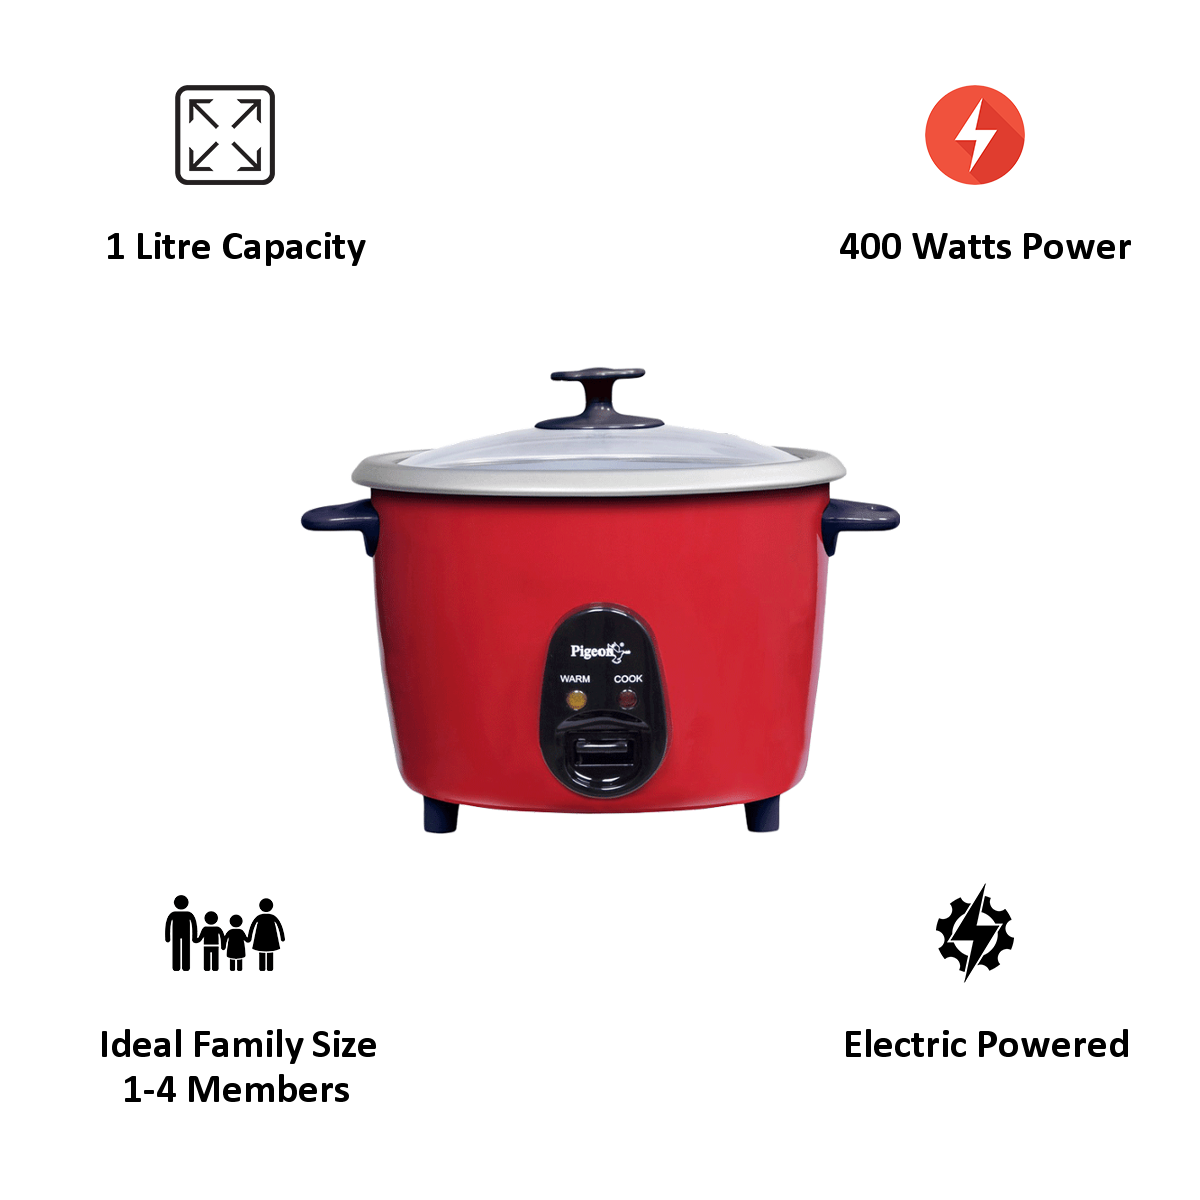 Buy Pigeon 1 Litre Electric Rice Cooker (Joy SDX, Red) Online - Croma